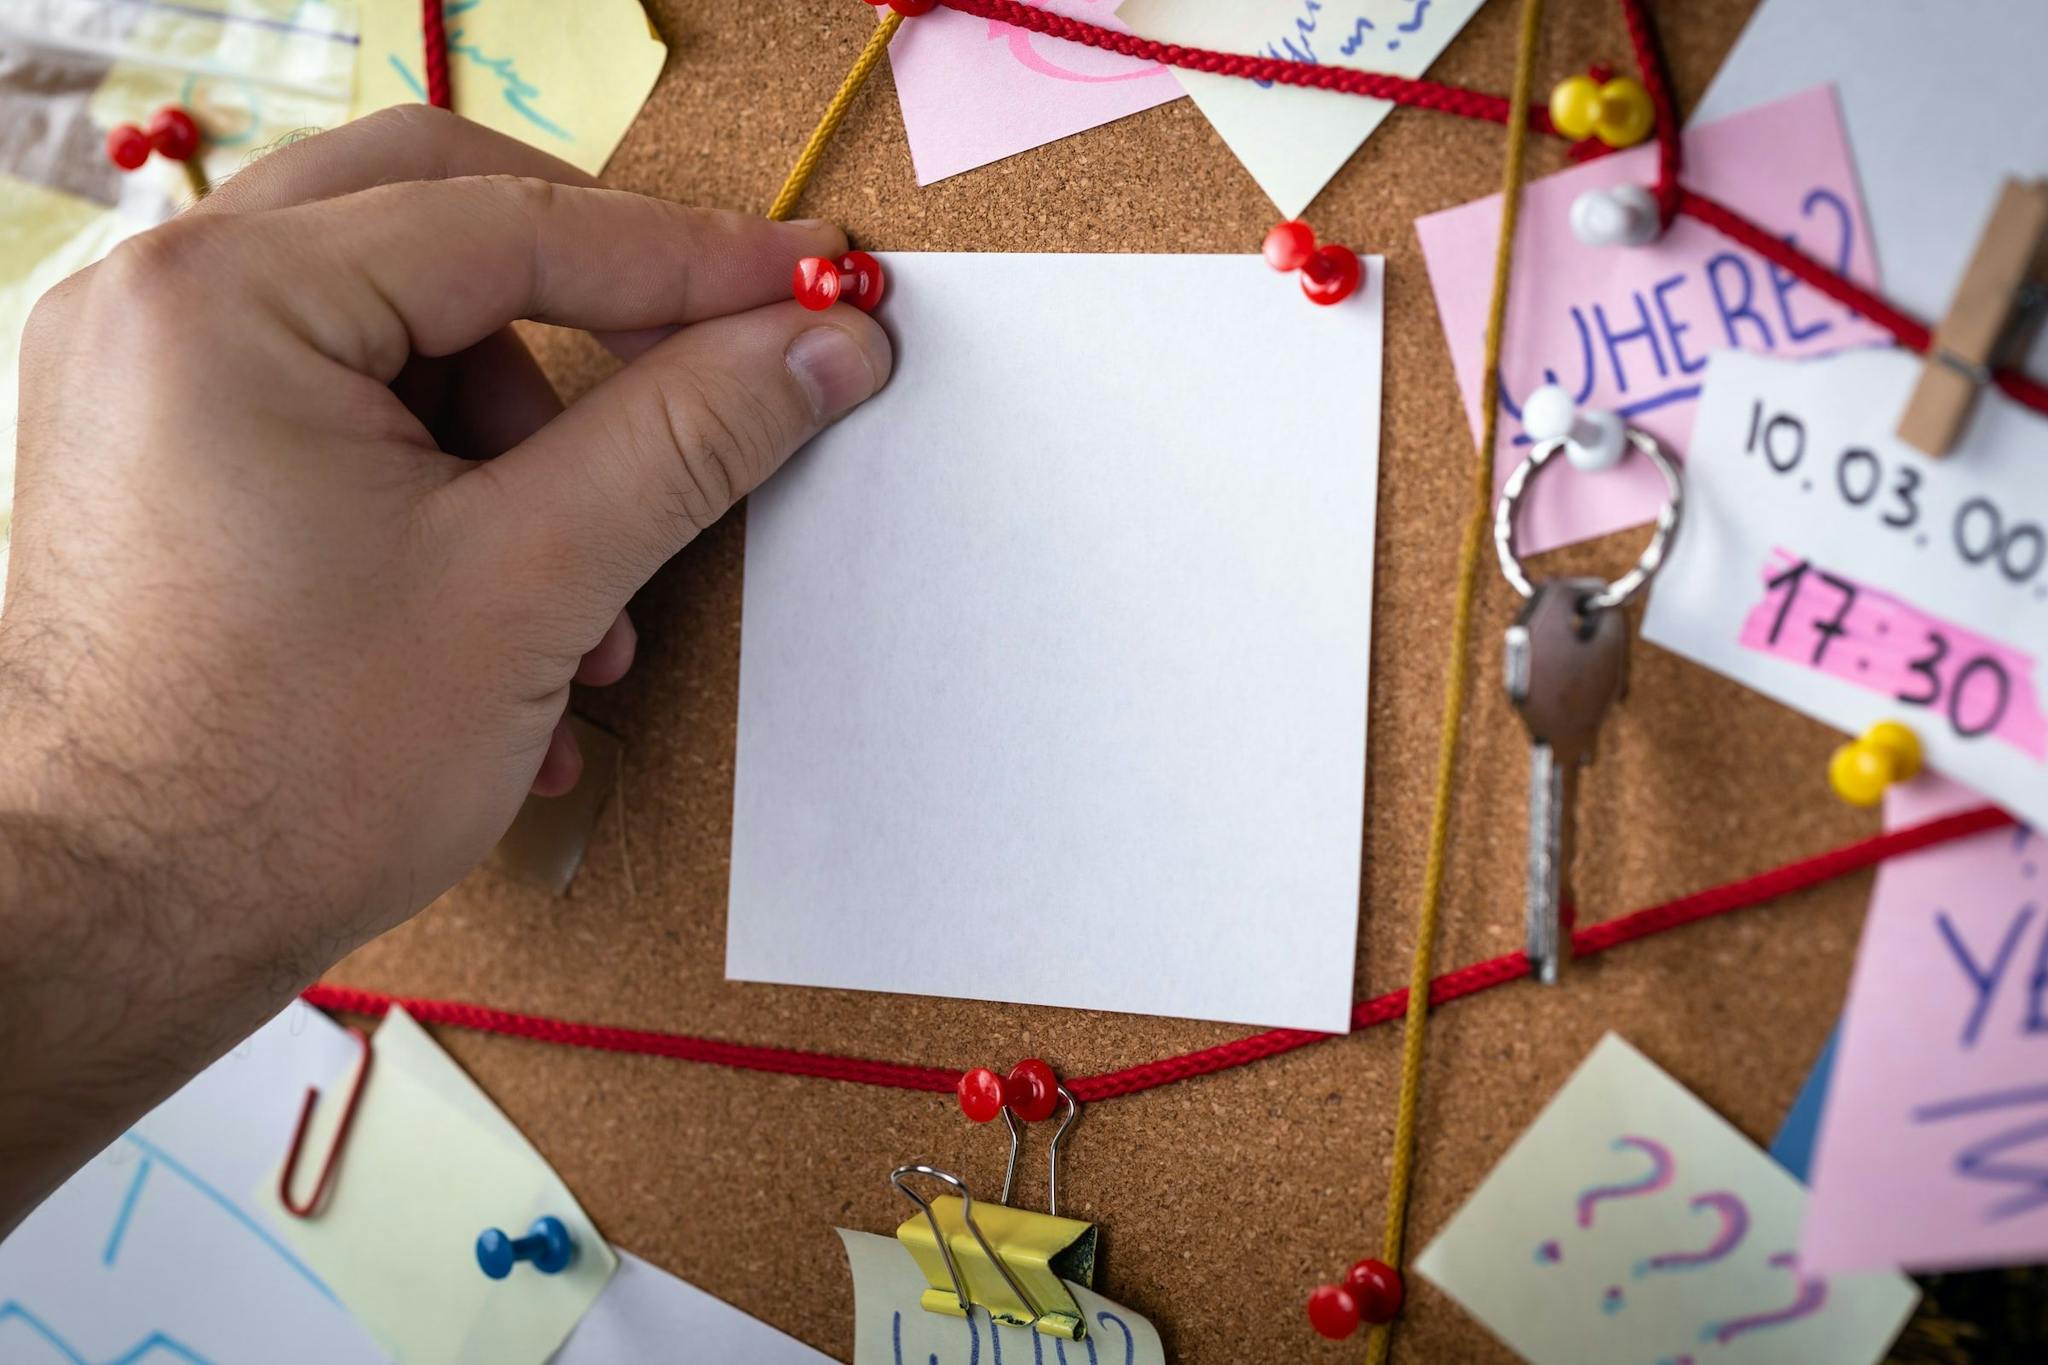 A pinboard showing an investigation with post-its and string